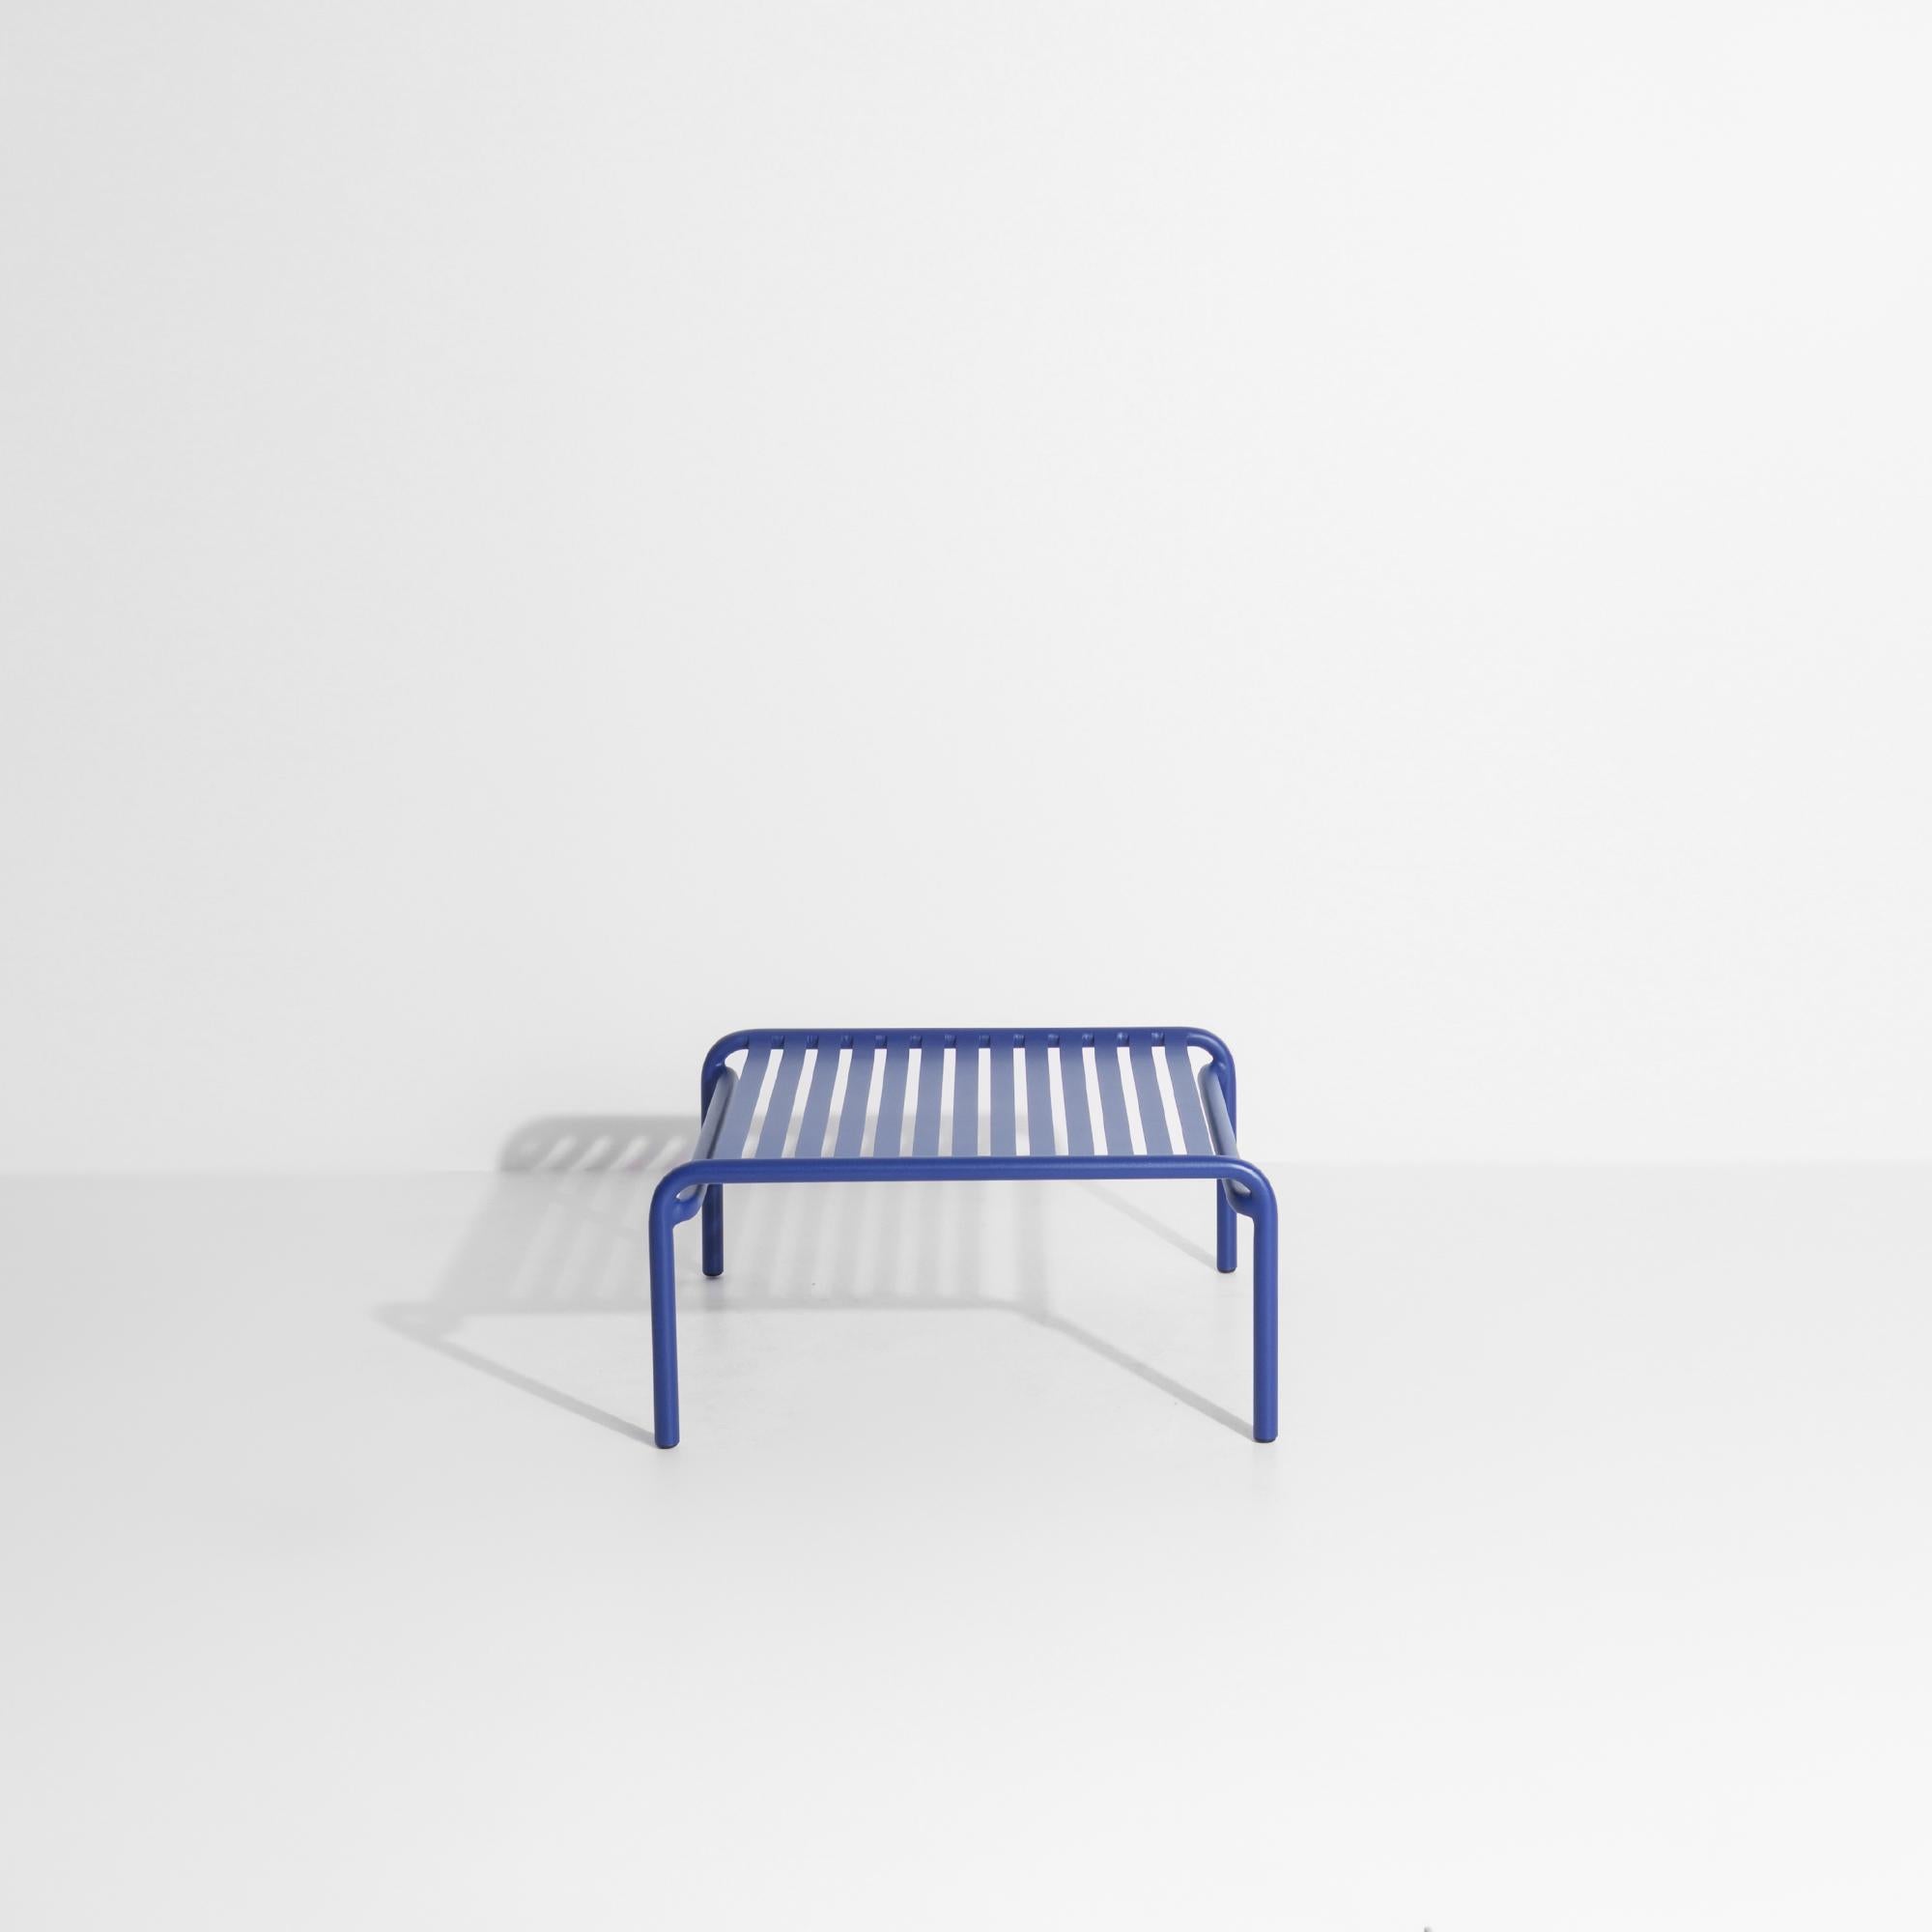 Chinese Petite Friture Week-End Coffee Table in Blue Aluminium by Studio BrichetZiegler For Sale